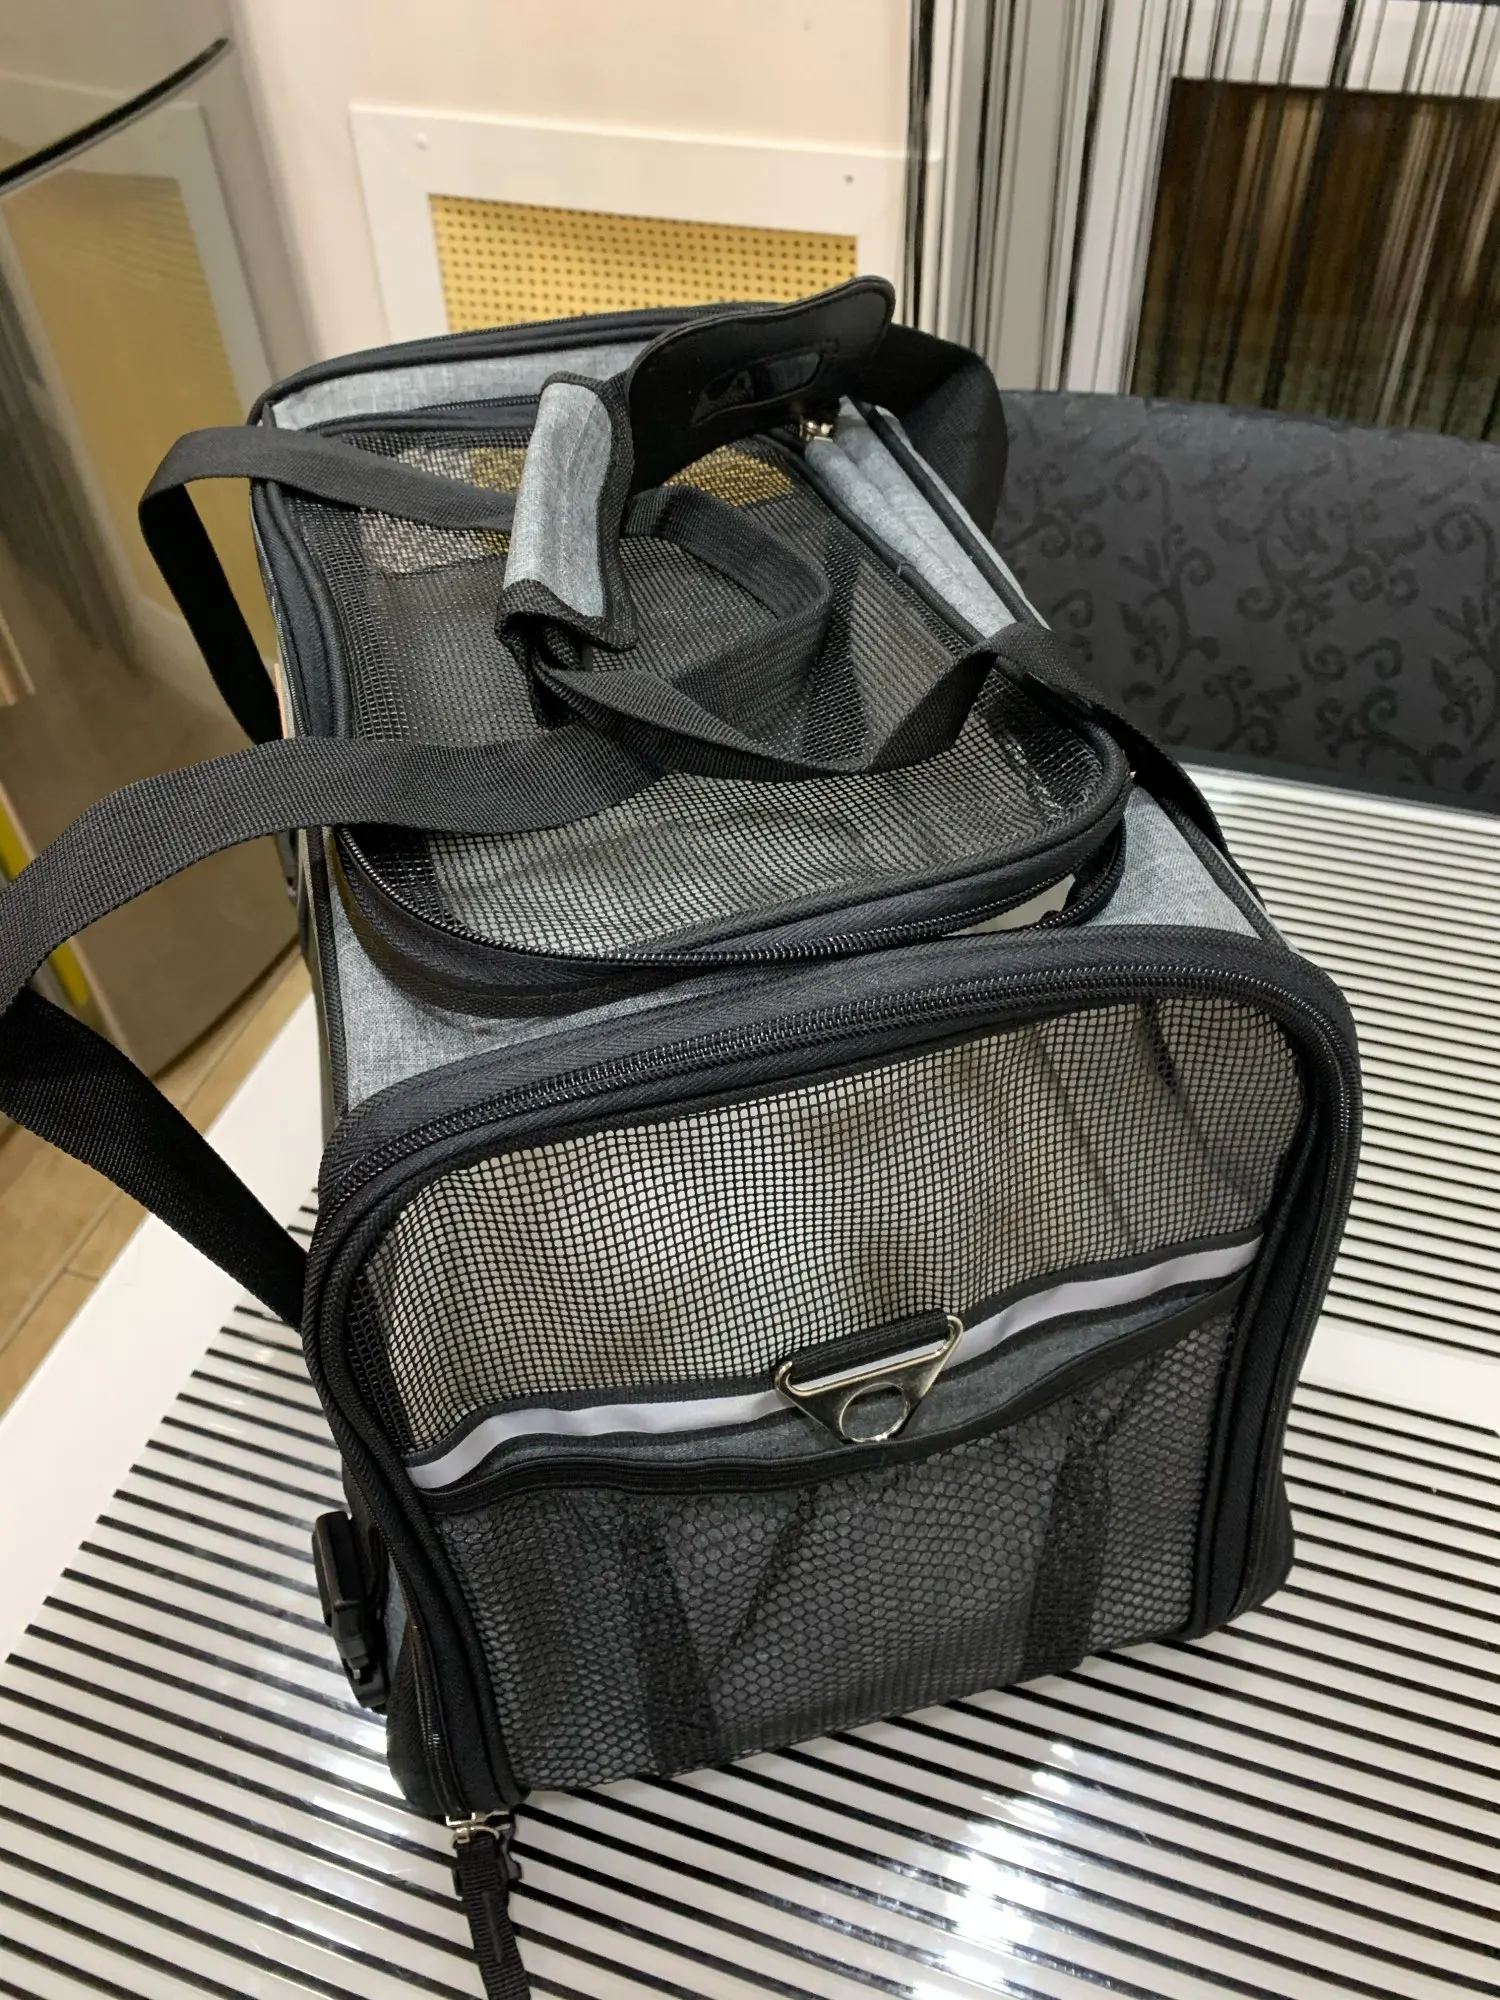 DogMEGA Luxurious Dog Travel Carrier | Airline Dog Carrier | Puppy Carrier photo review